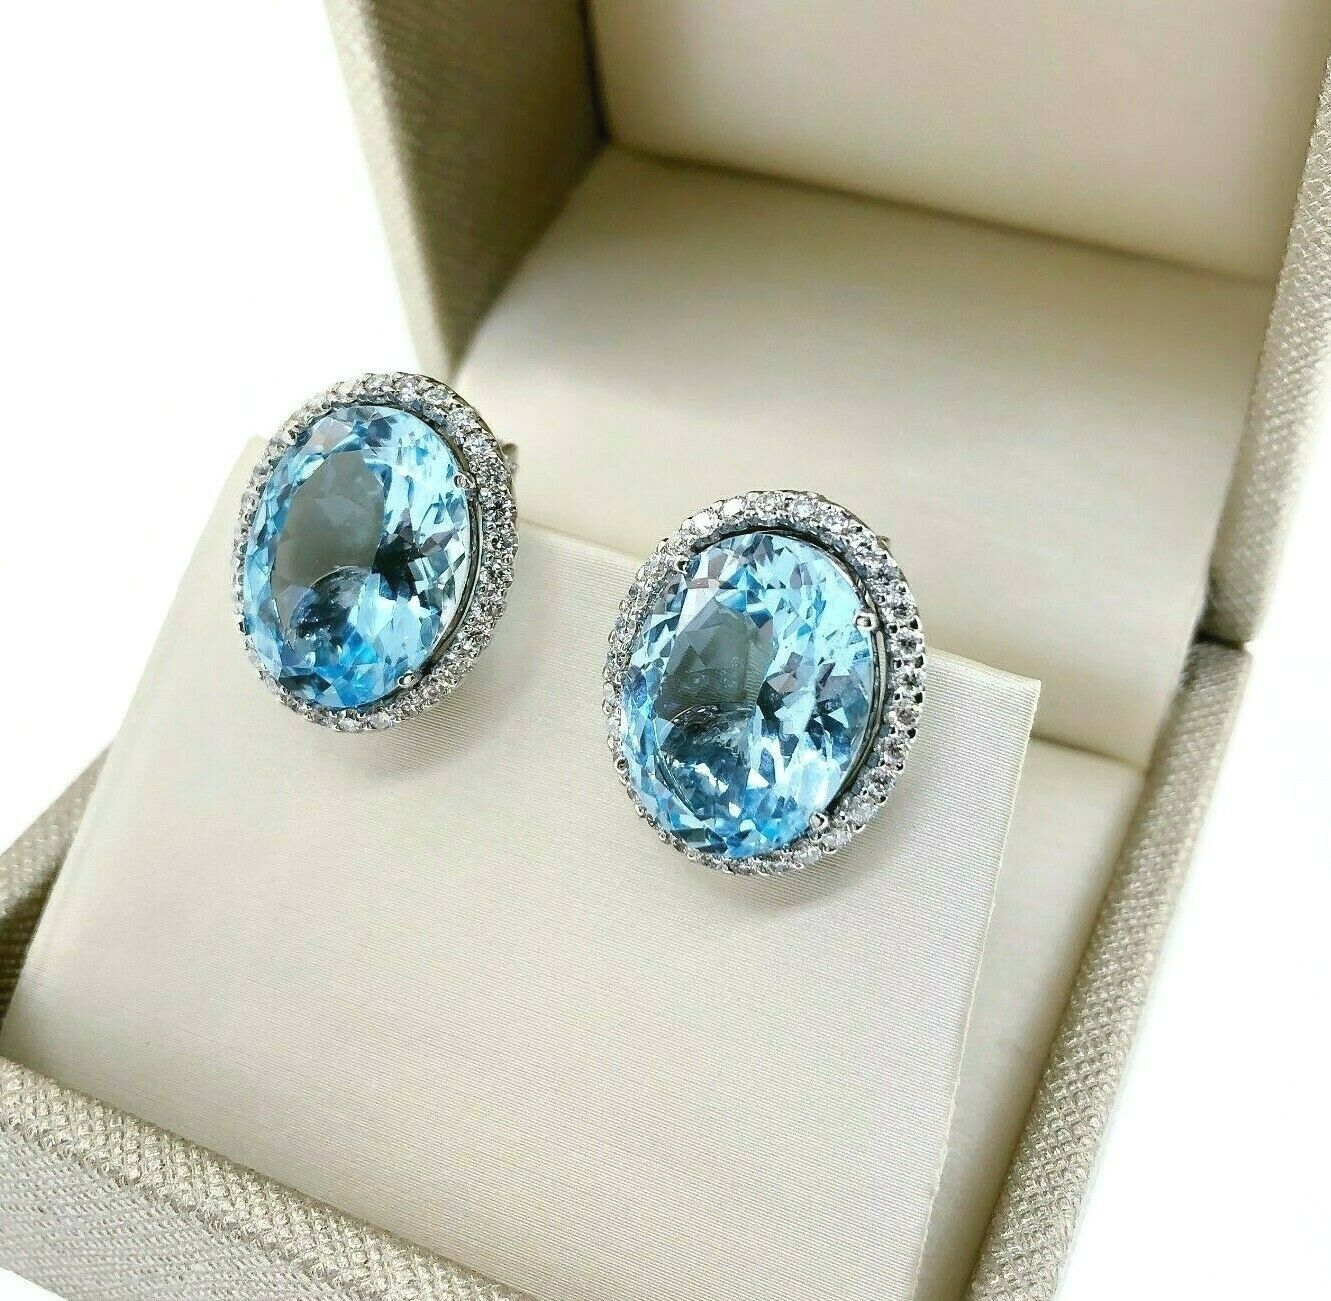 Fine 20.96 Carats t.w. Swiss Blue Topaz and Diamond Halo French Clip Earrings